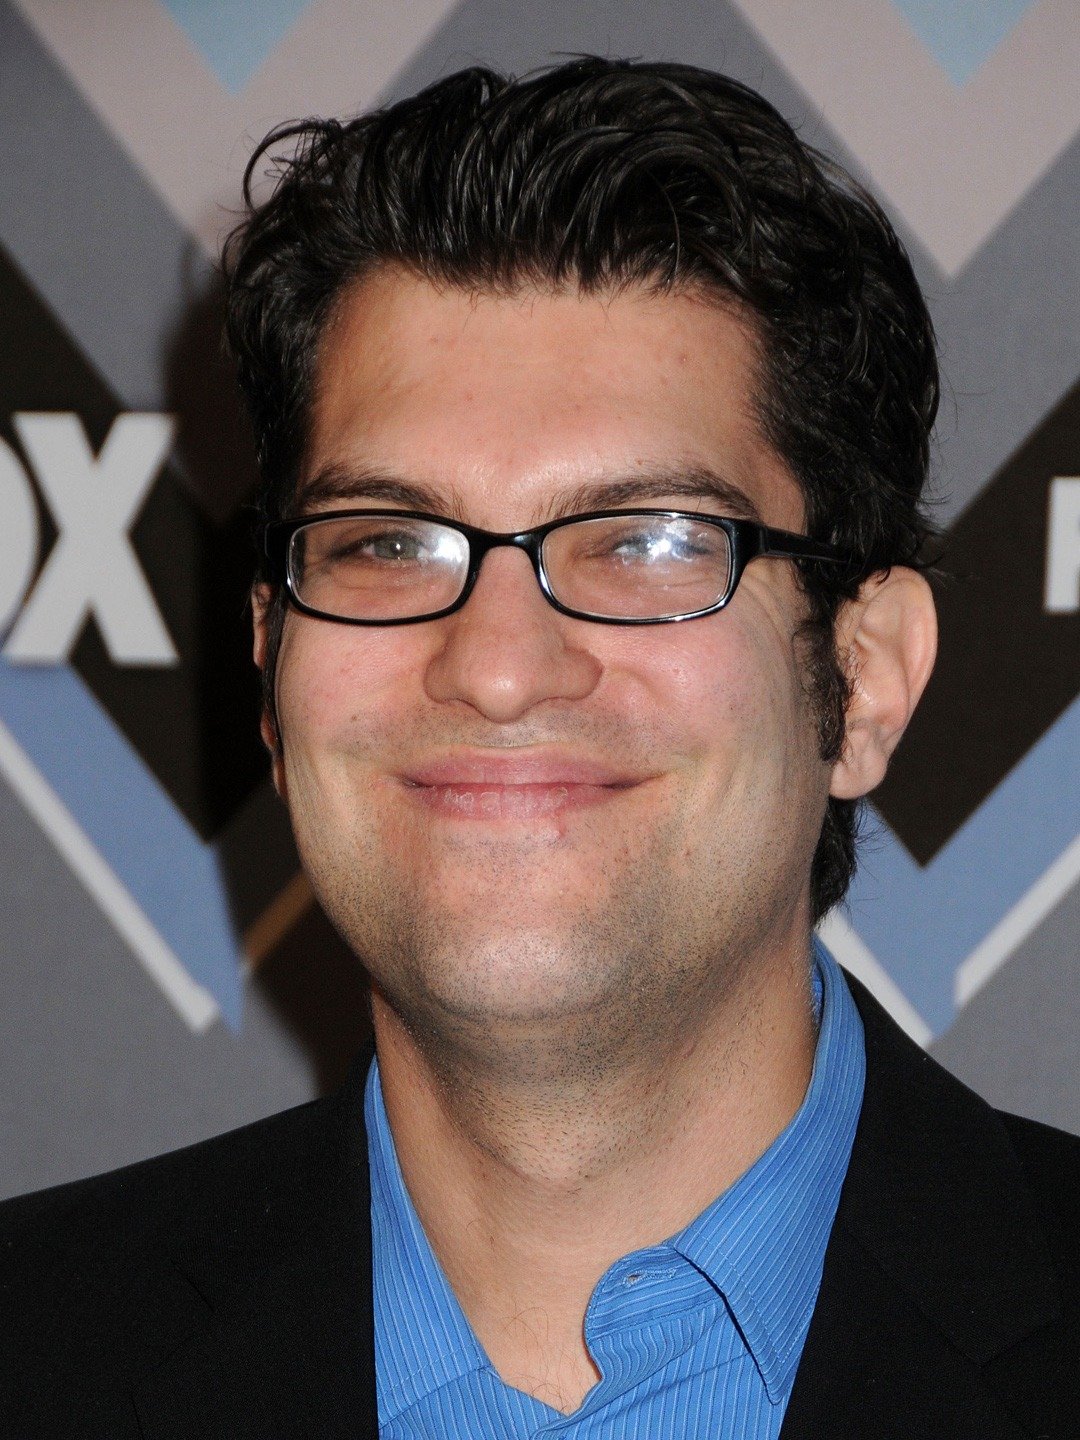 The 42-year old son of father (?) and mother(?) Dan Mintz in 2024 photo. Dan Mintz earned a  million dollar salary - leaving the net worth at 18 million in 2024